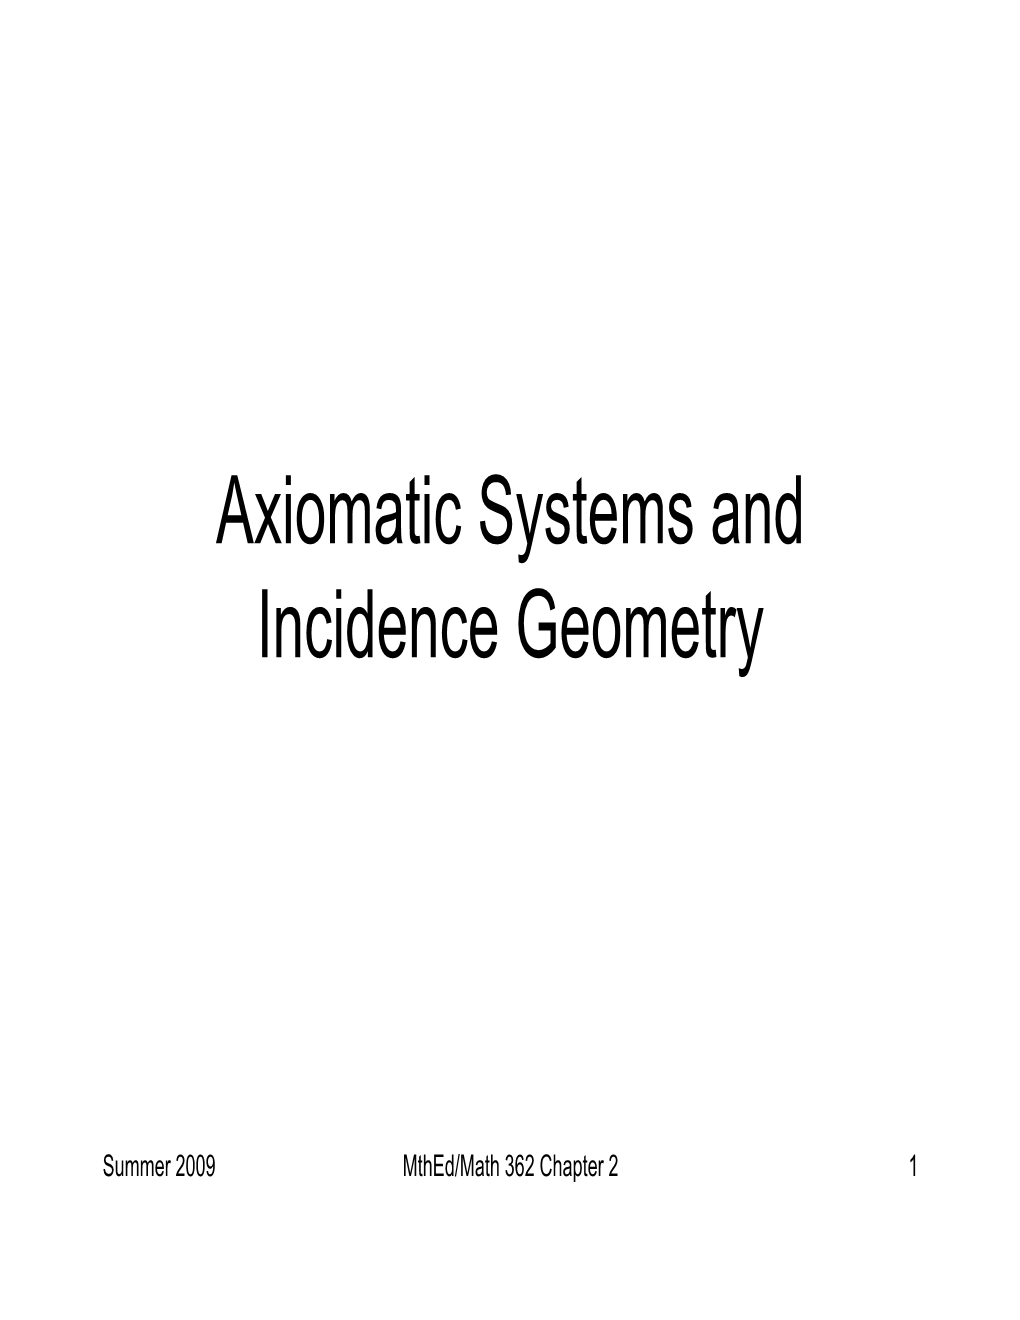 Axiomatic Systems and Incidence Geometry